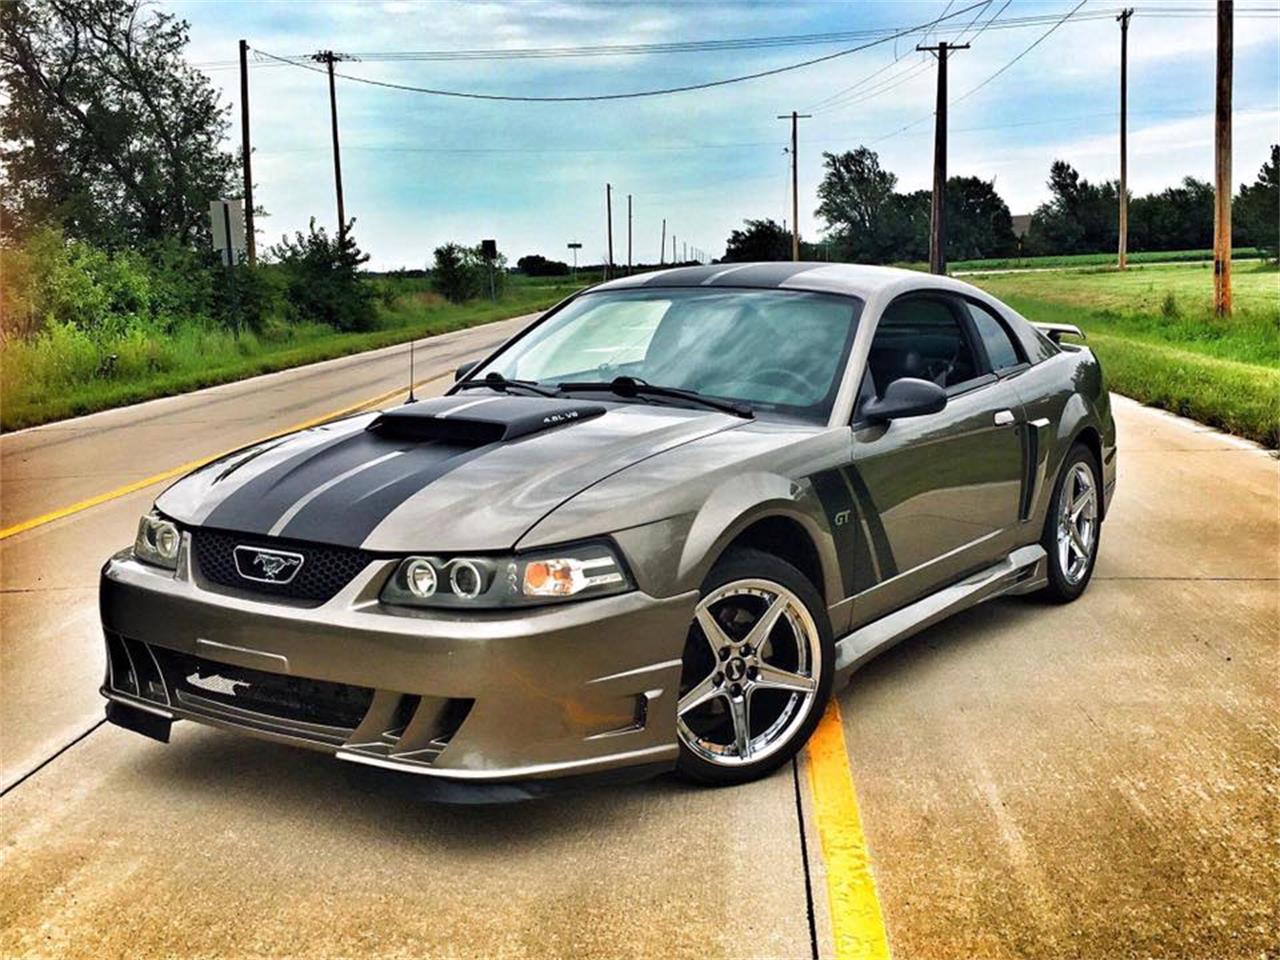 2002 Ford Mustang Gt For Sale Classiccars Com Cc 1112936